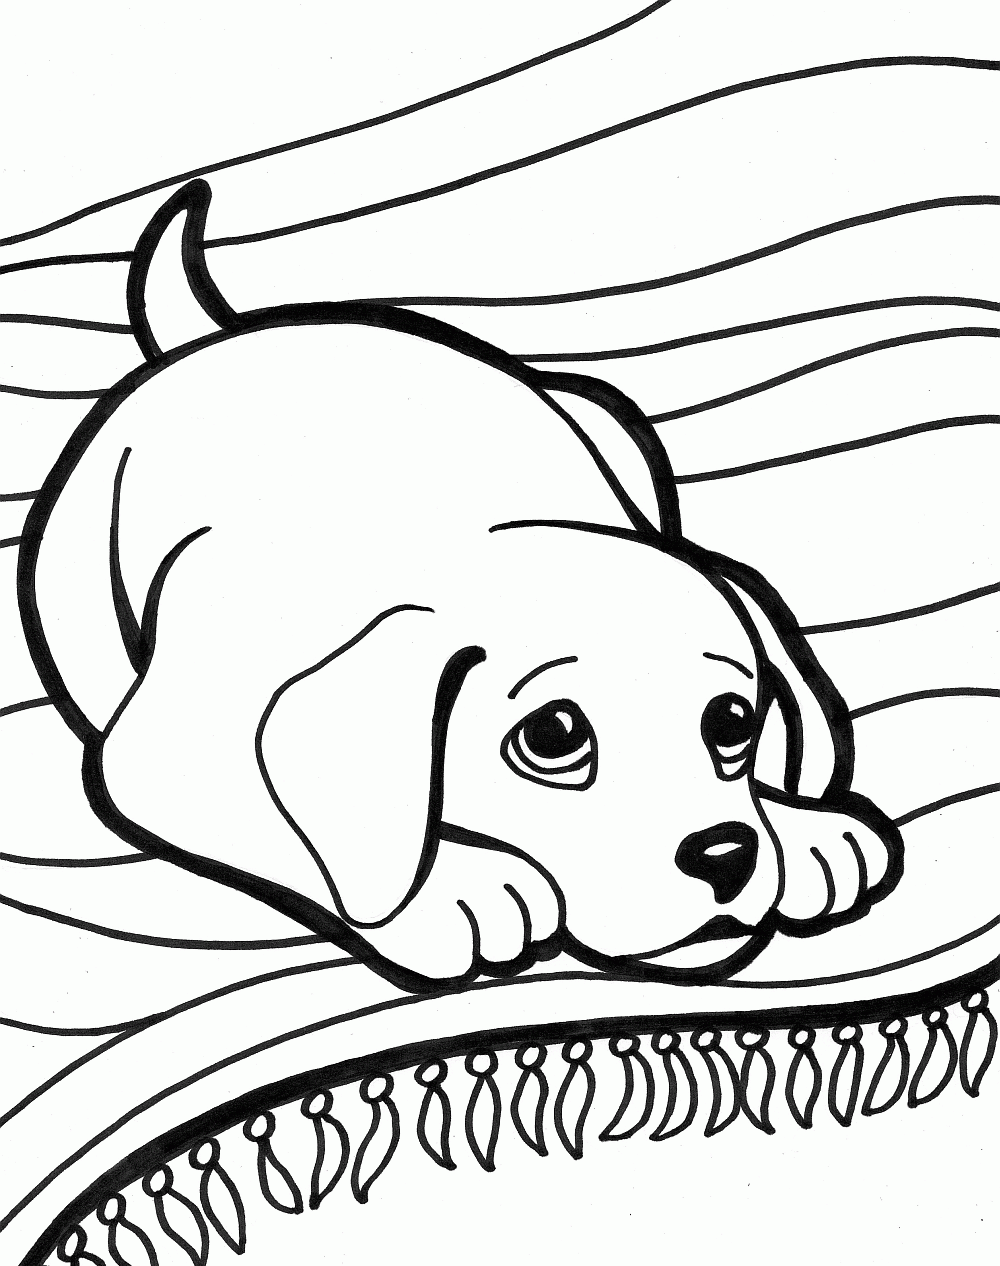 Free Cartoon Coloring Pages To Print - Cartoon Coloring Pages